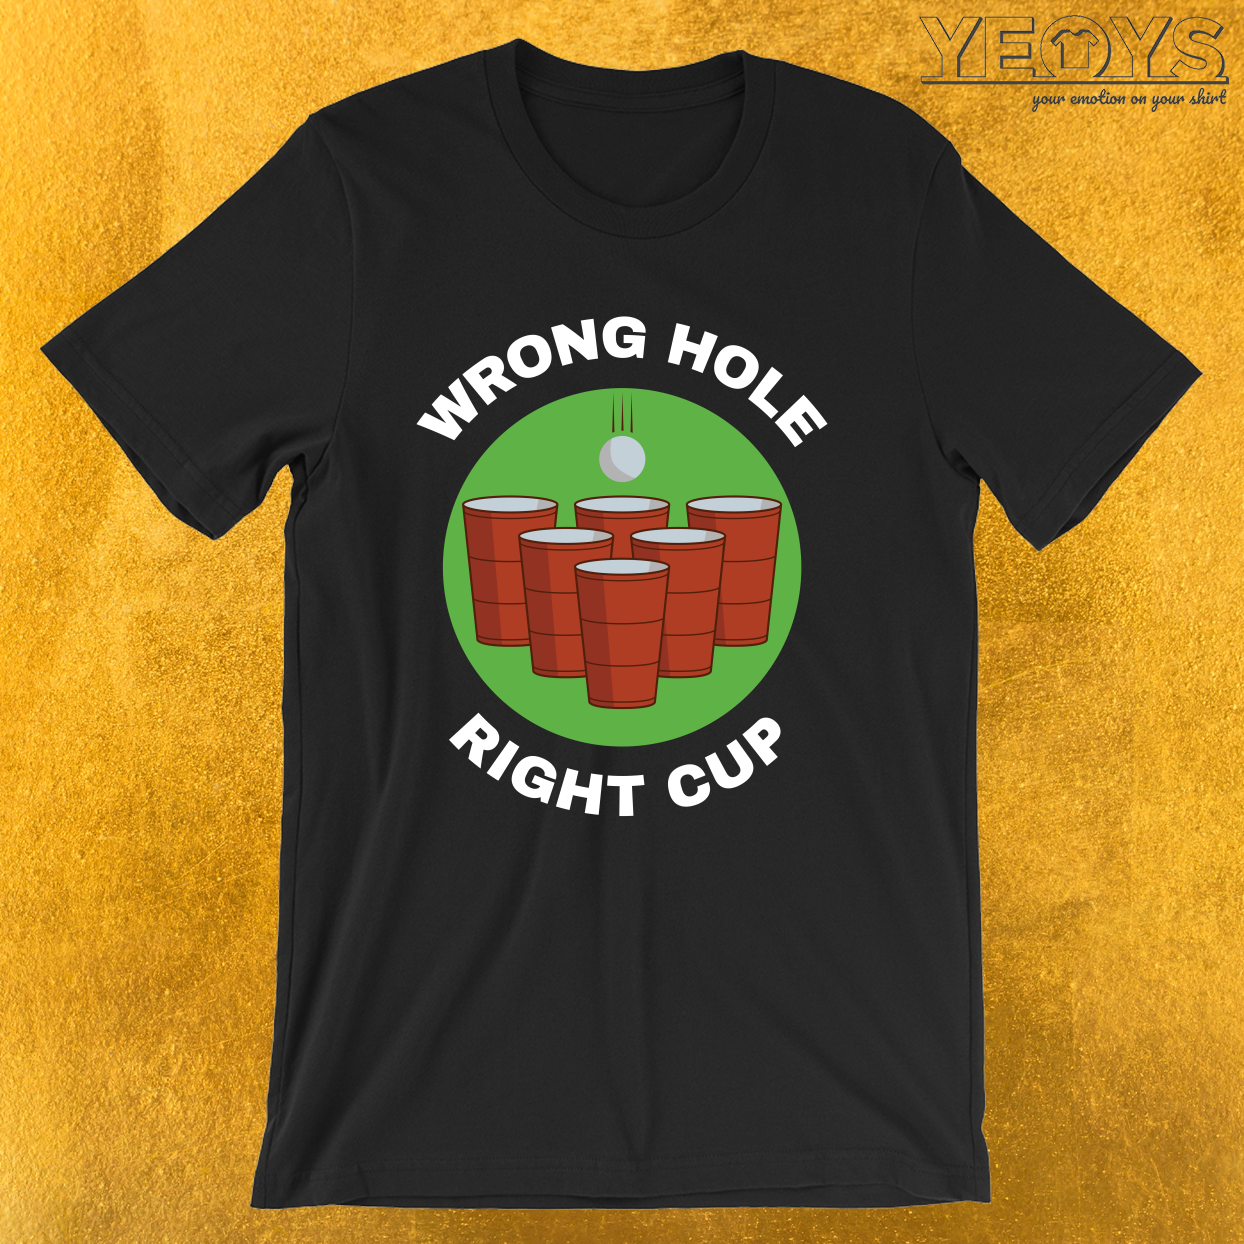 Wrong Hole Right Cup – Funny Beer Pong Tee